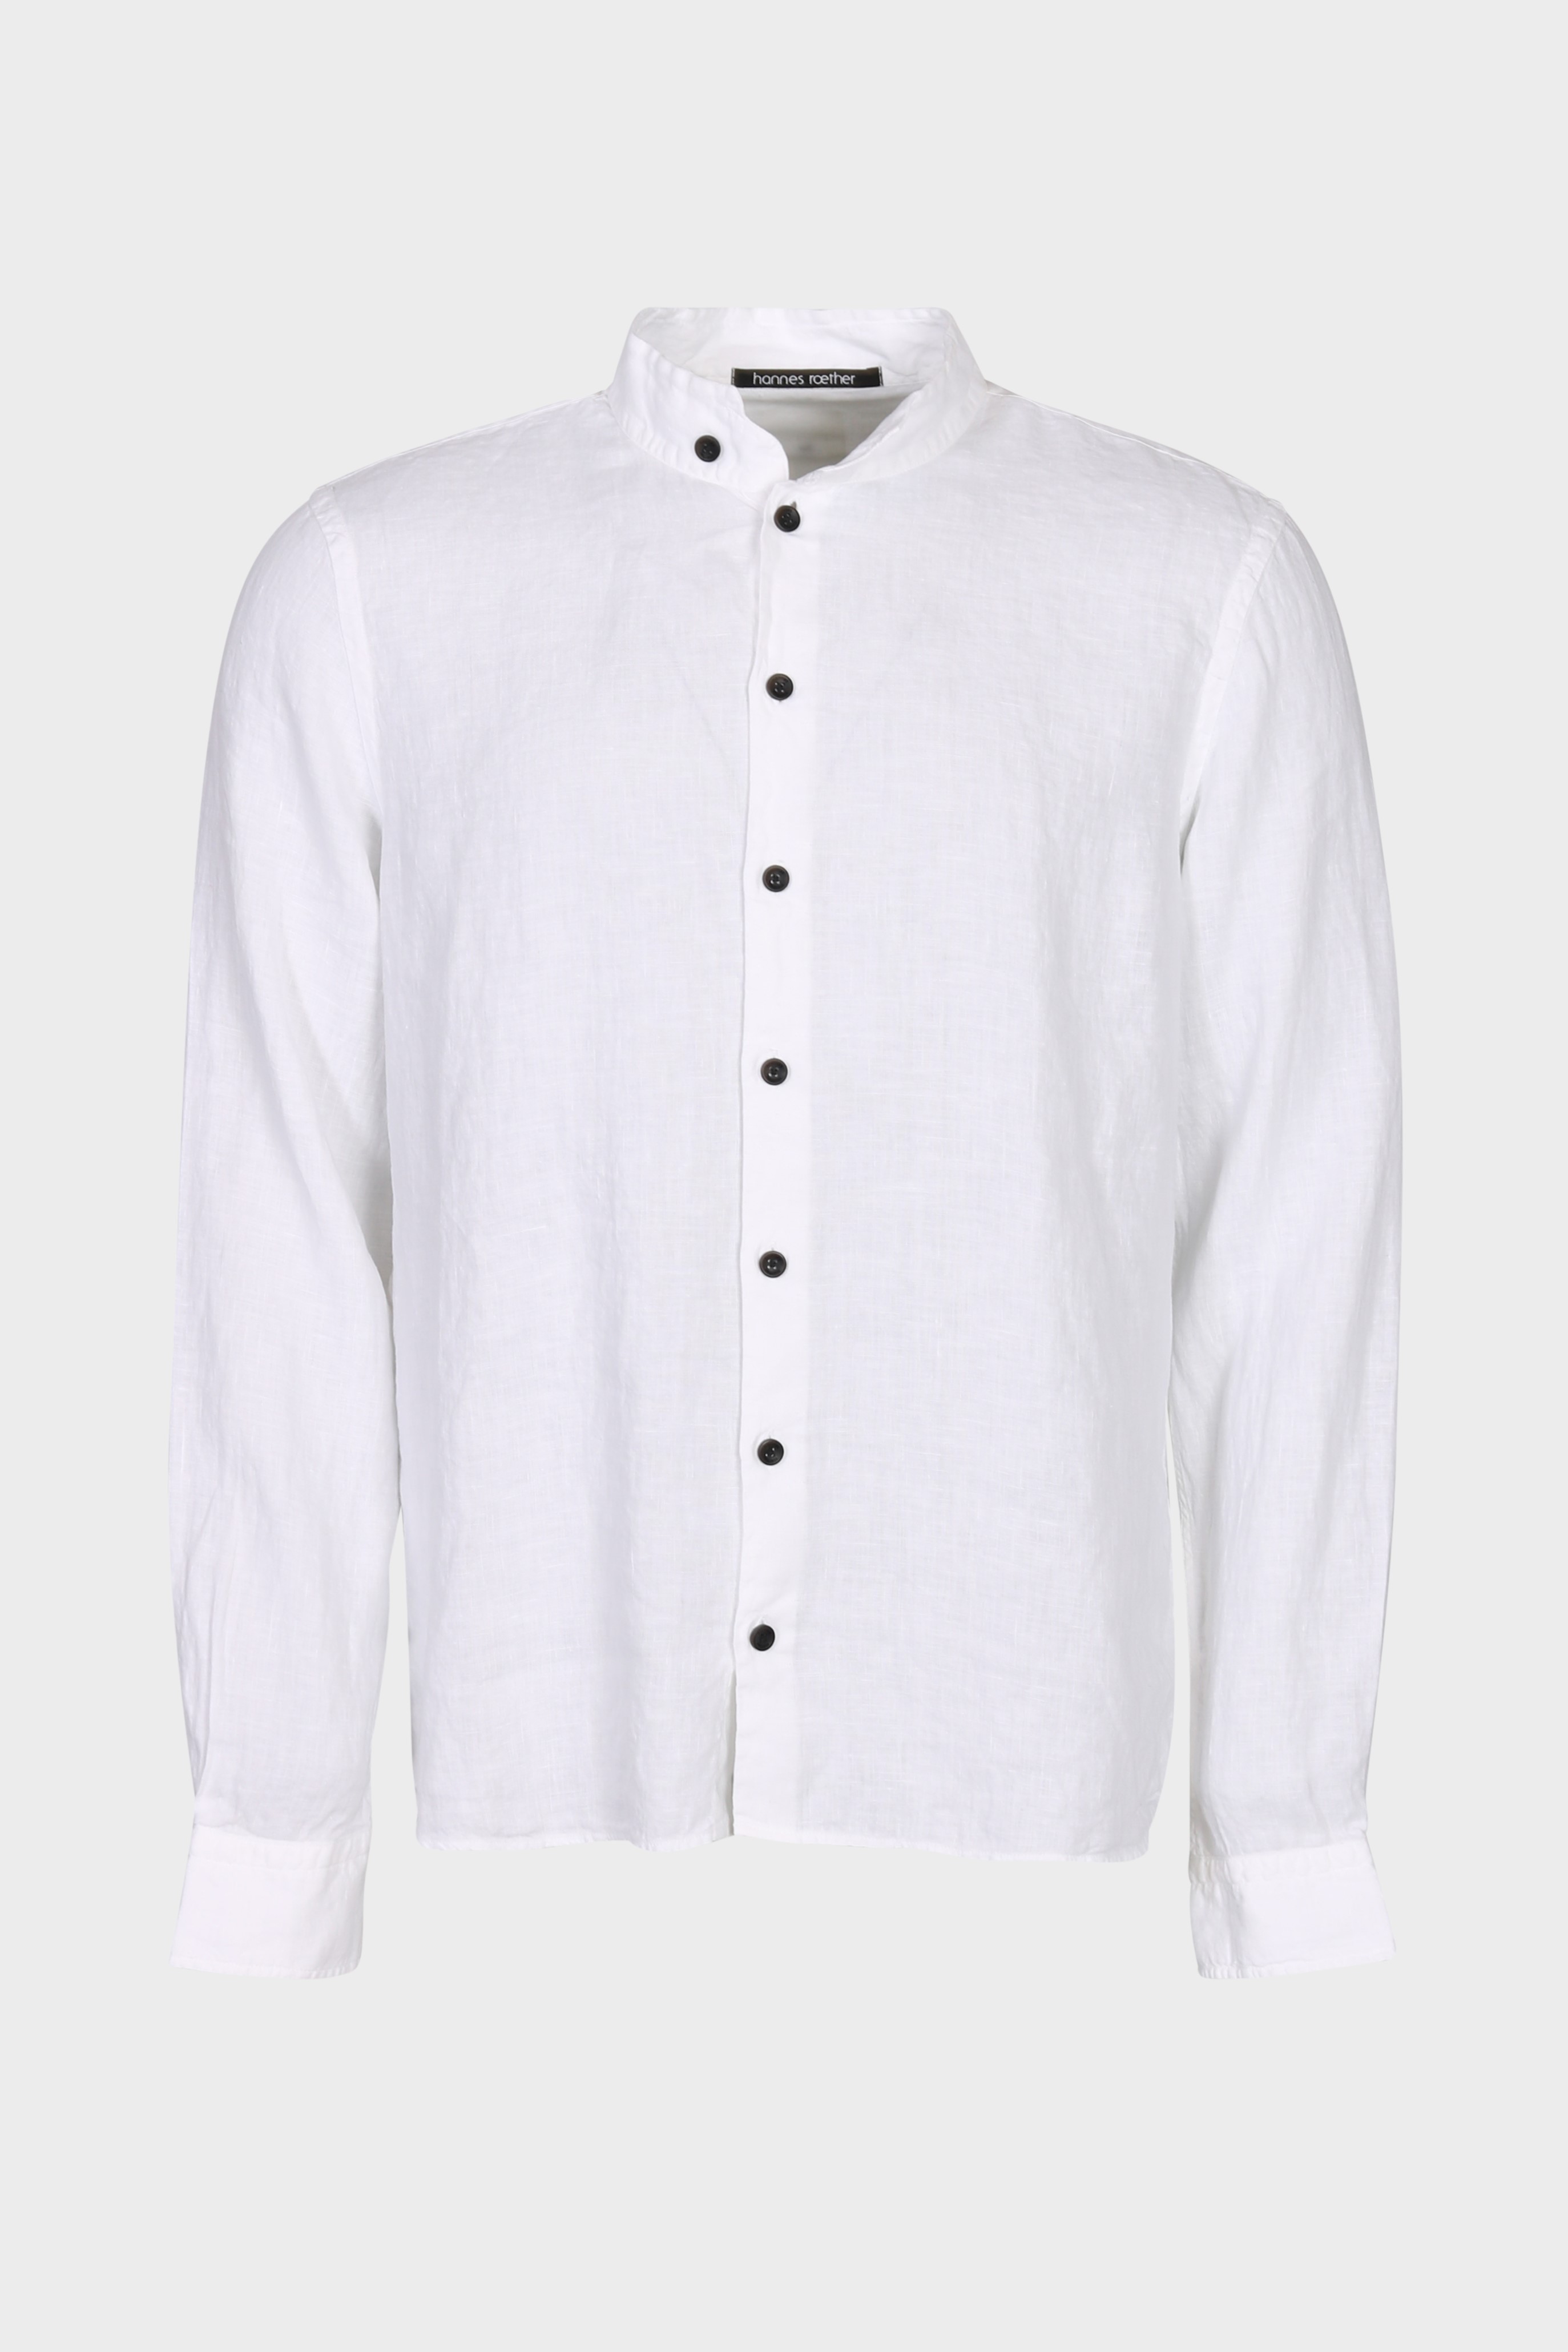 HANNES ROETHER Linen Shirt in White